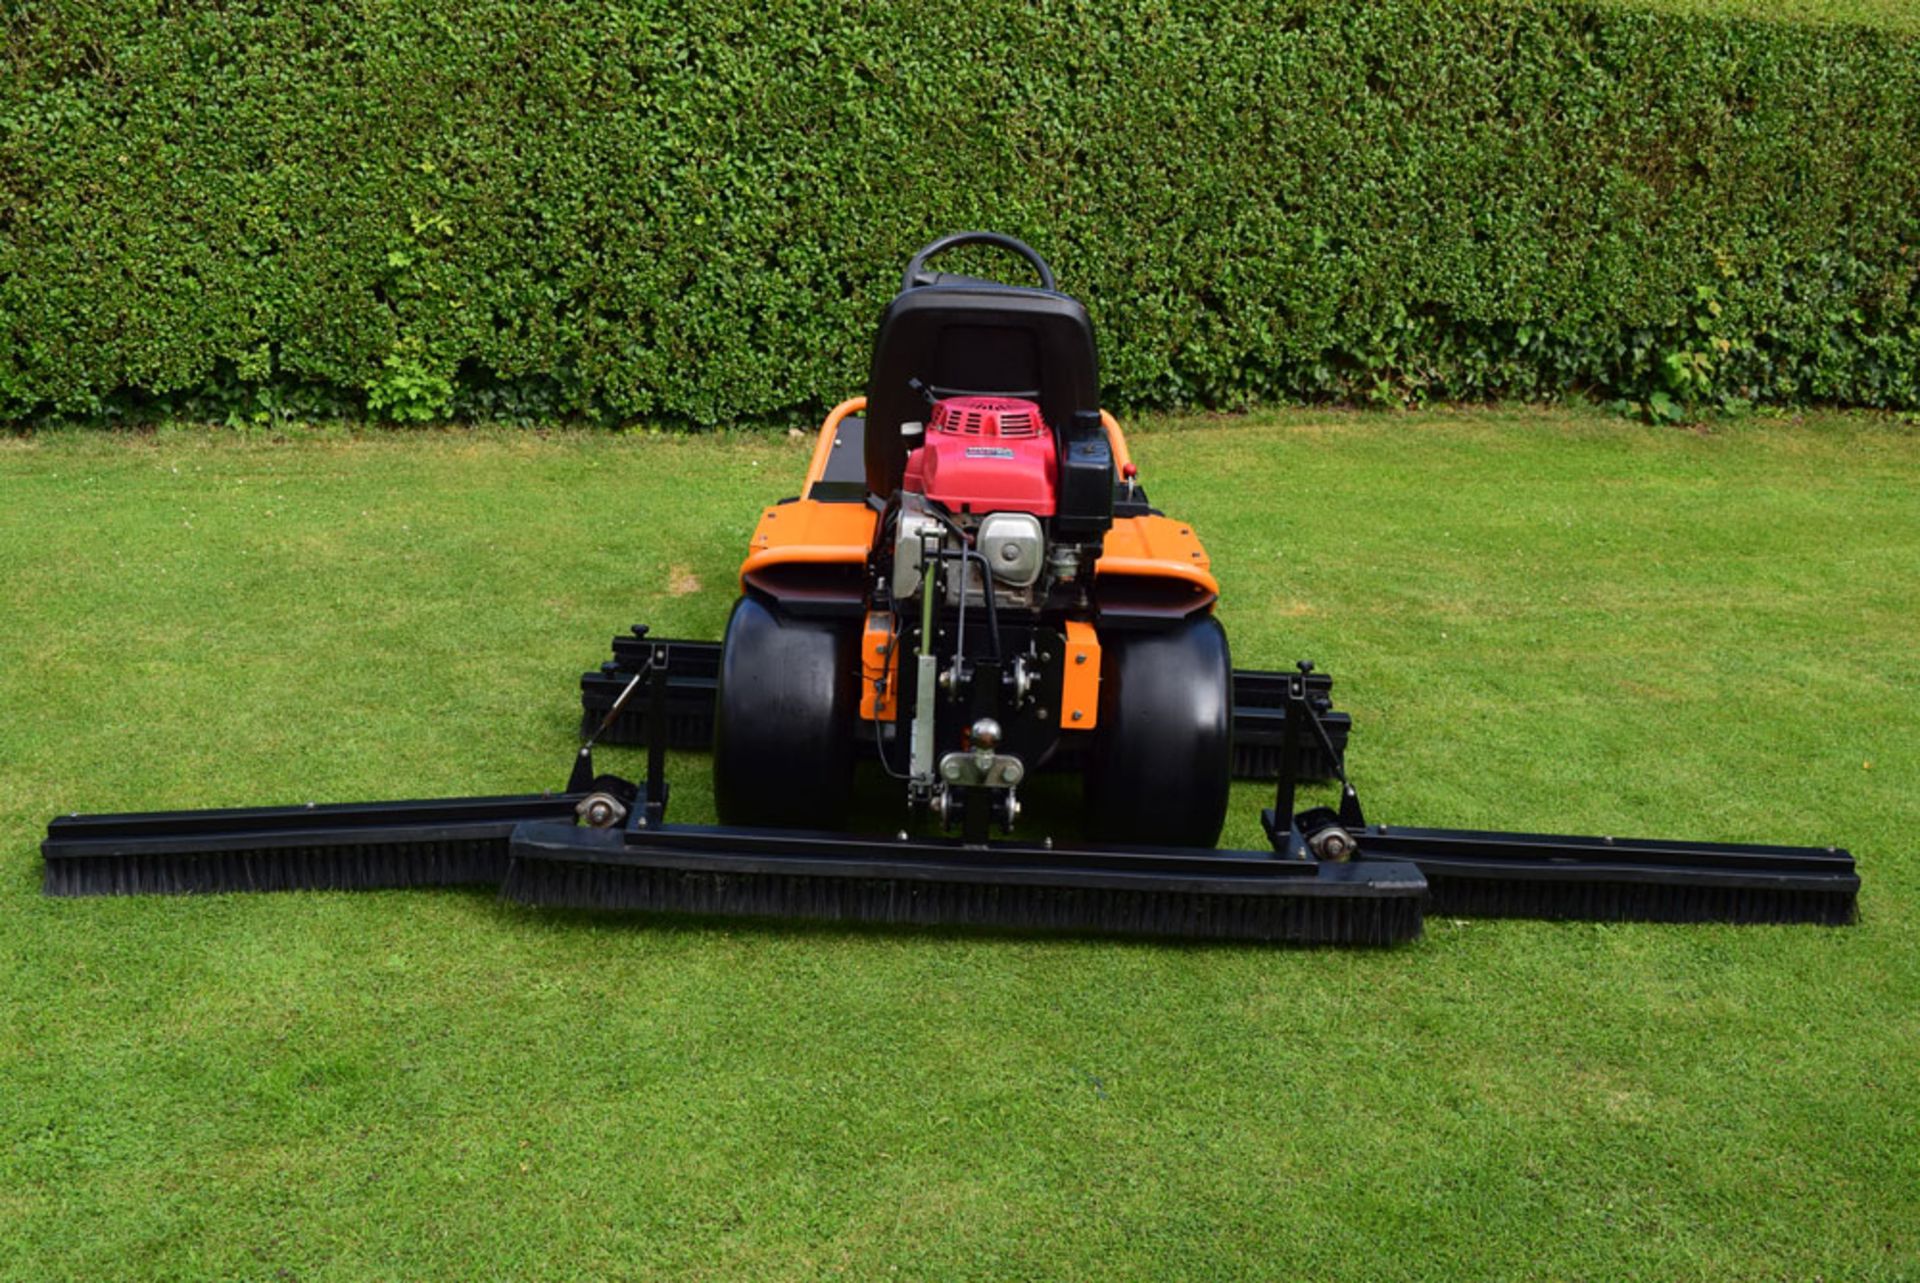 Sisis Brush Pro ride-on brushing system for synthetic grass - Image 12 of 16